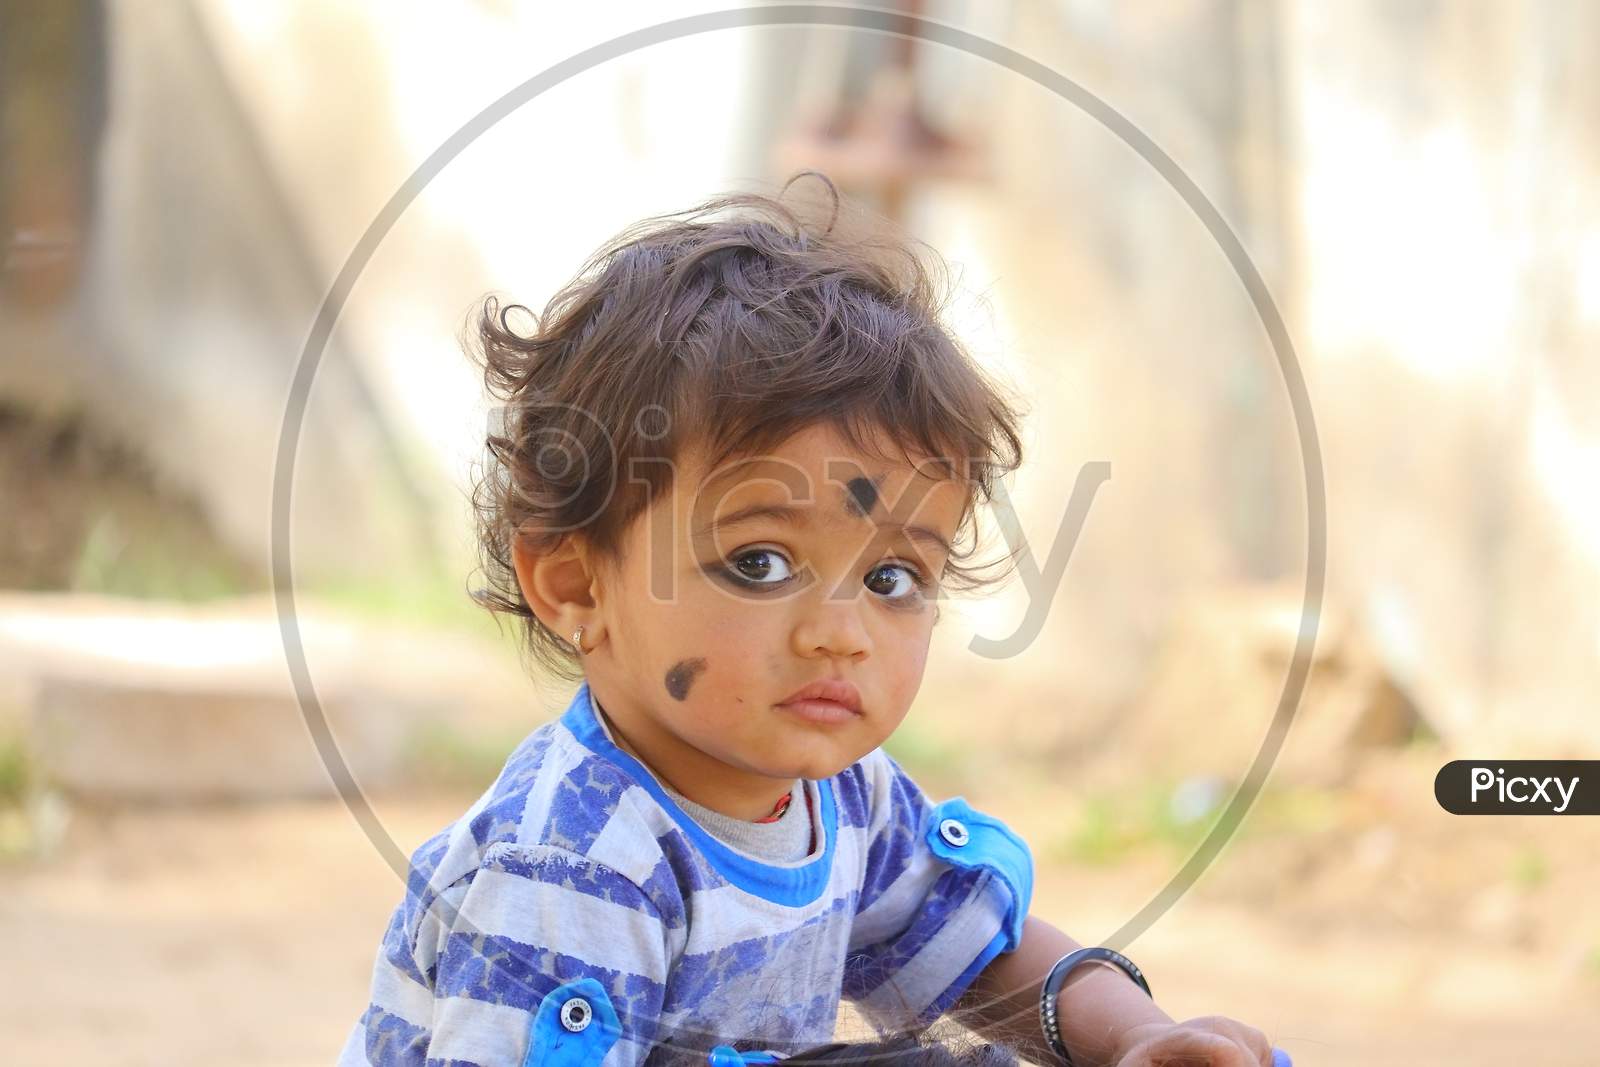 The Child Looking At The Camera With A Mascara In His Eyes